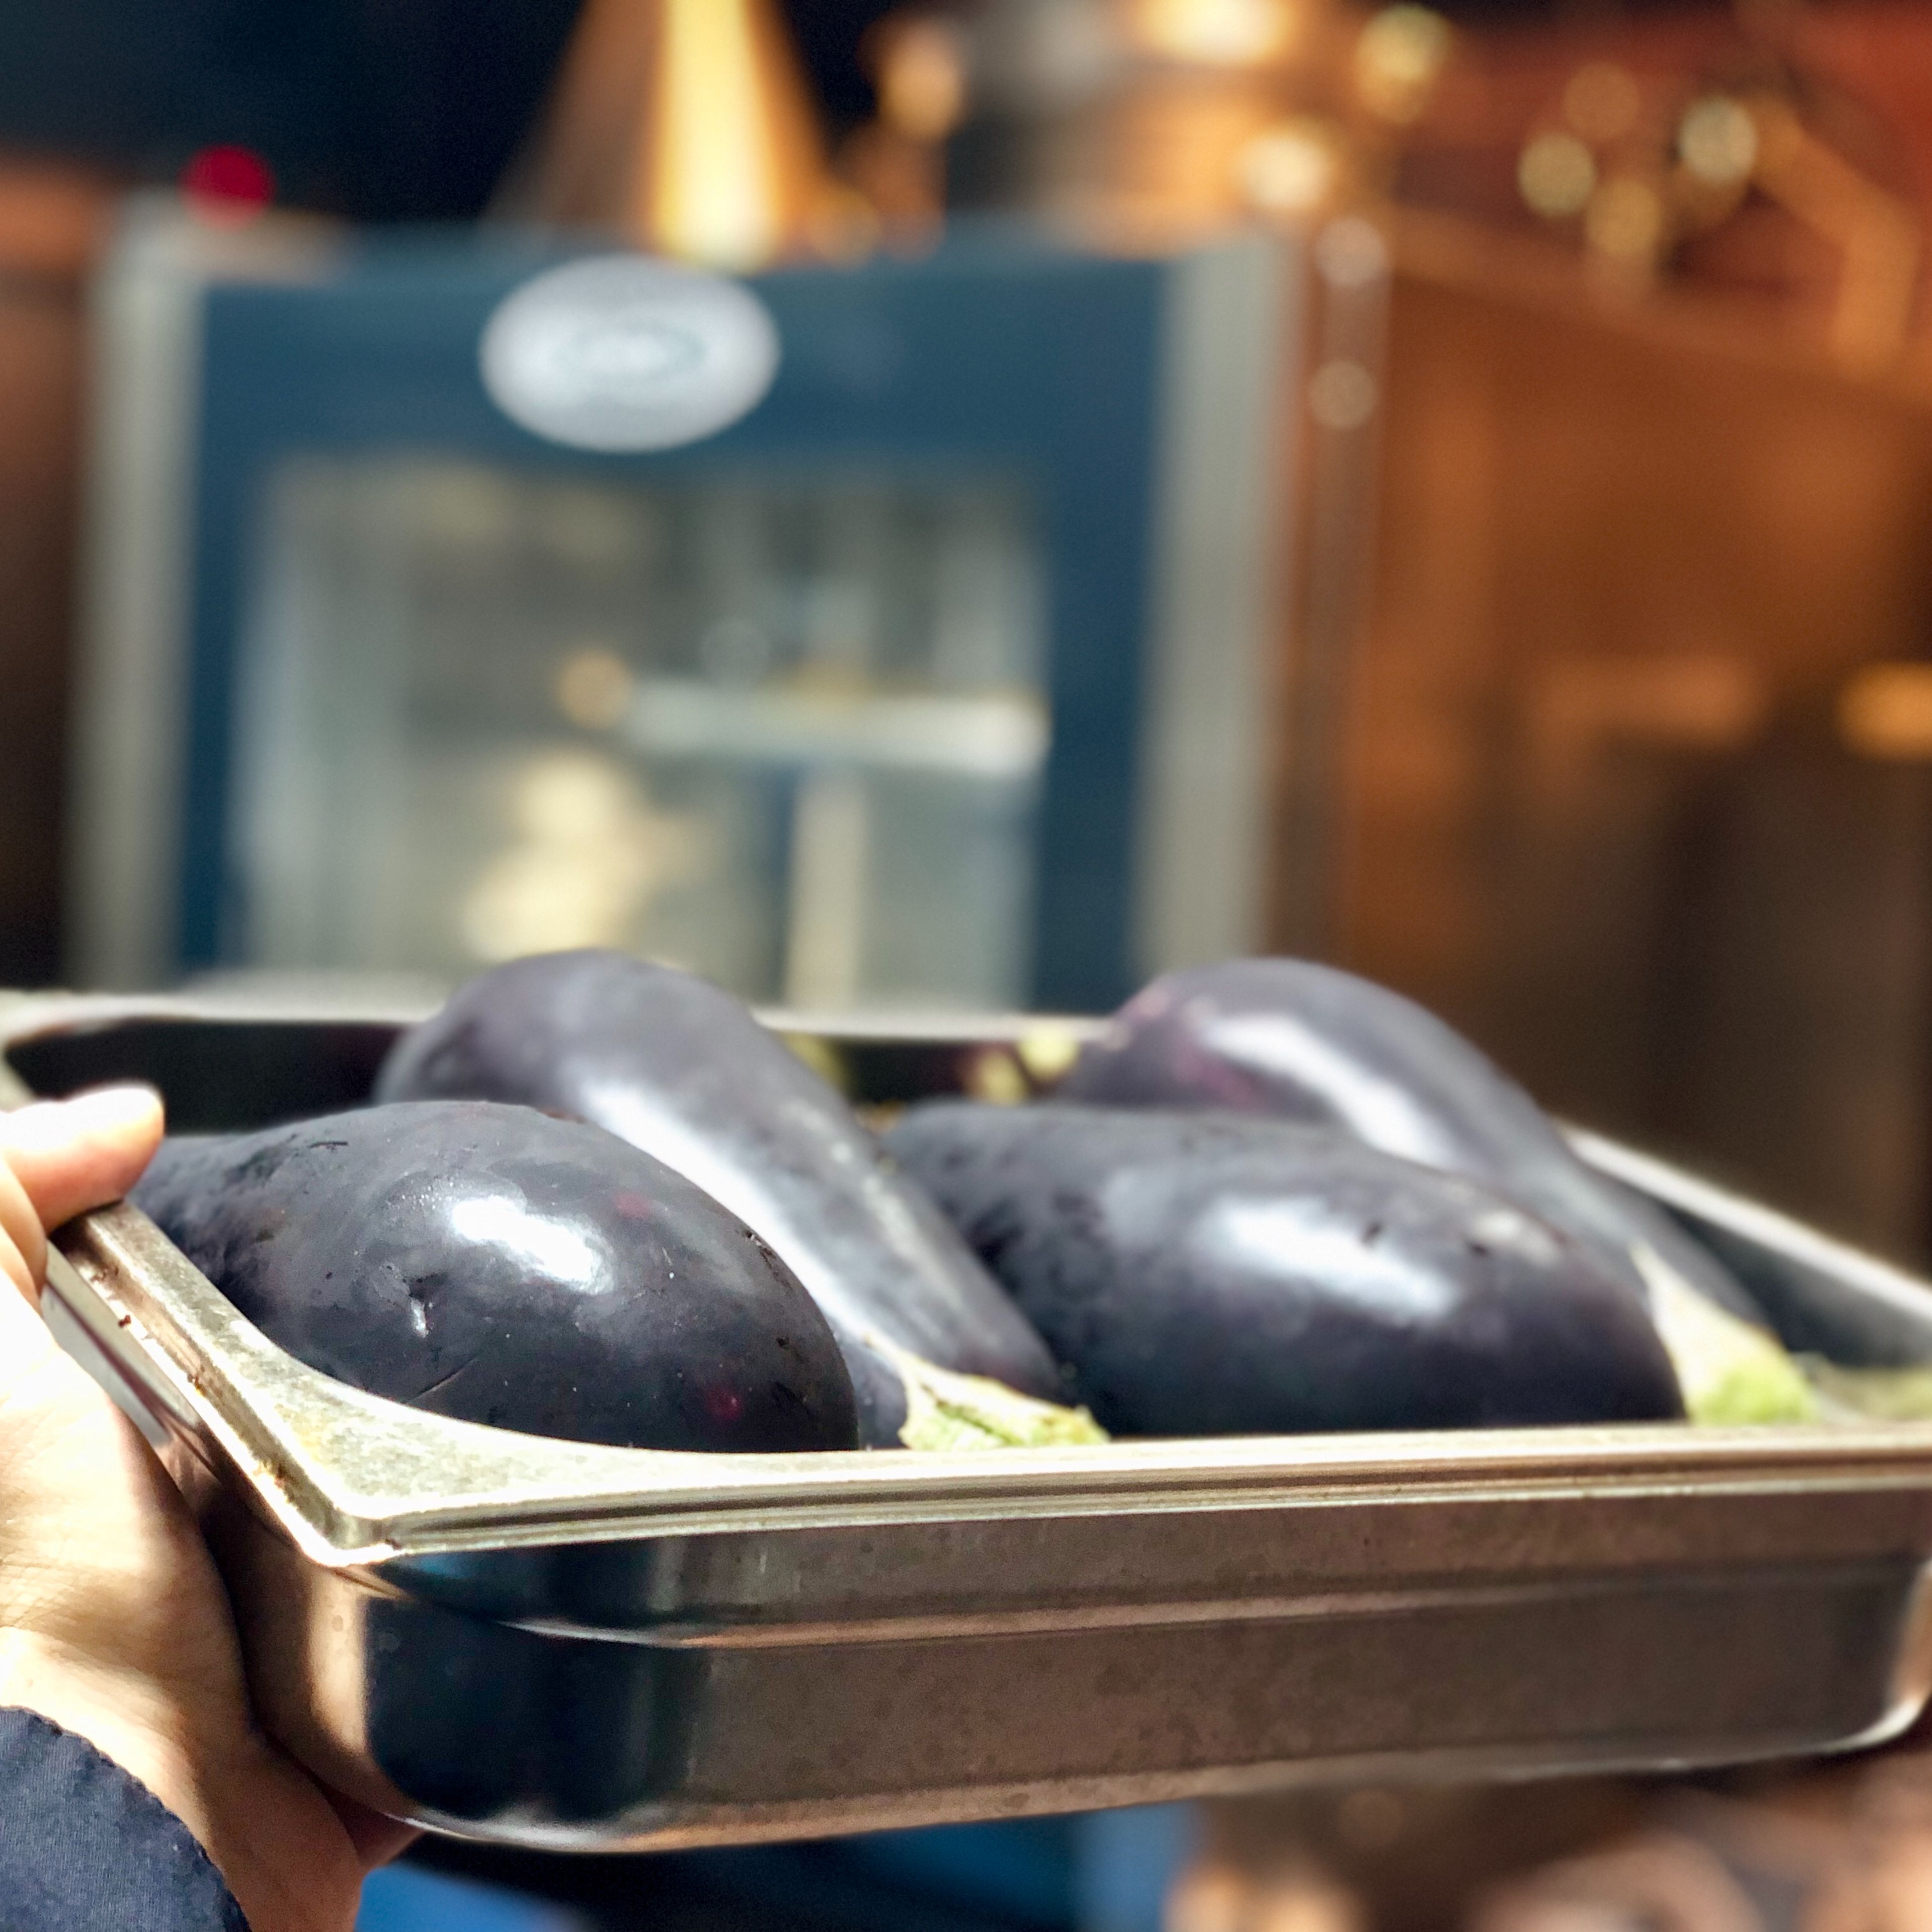 Preheat oven to 200 degrees C. Pierce the eggplants a few times with a fork to vent. Roast for about 50 minutes. Take out of oven and let it cool for 10 minutes. When the eggplants are cool, cut off the top and peel off the skin.